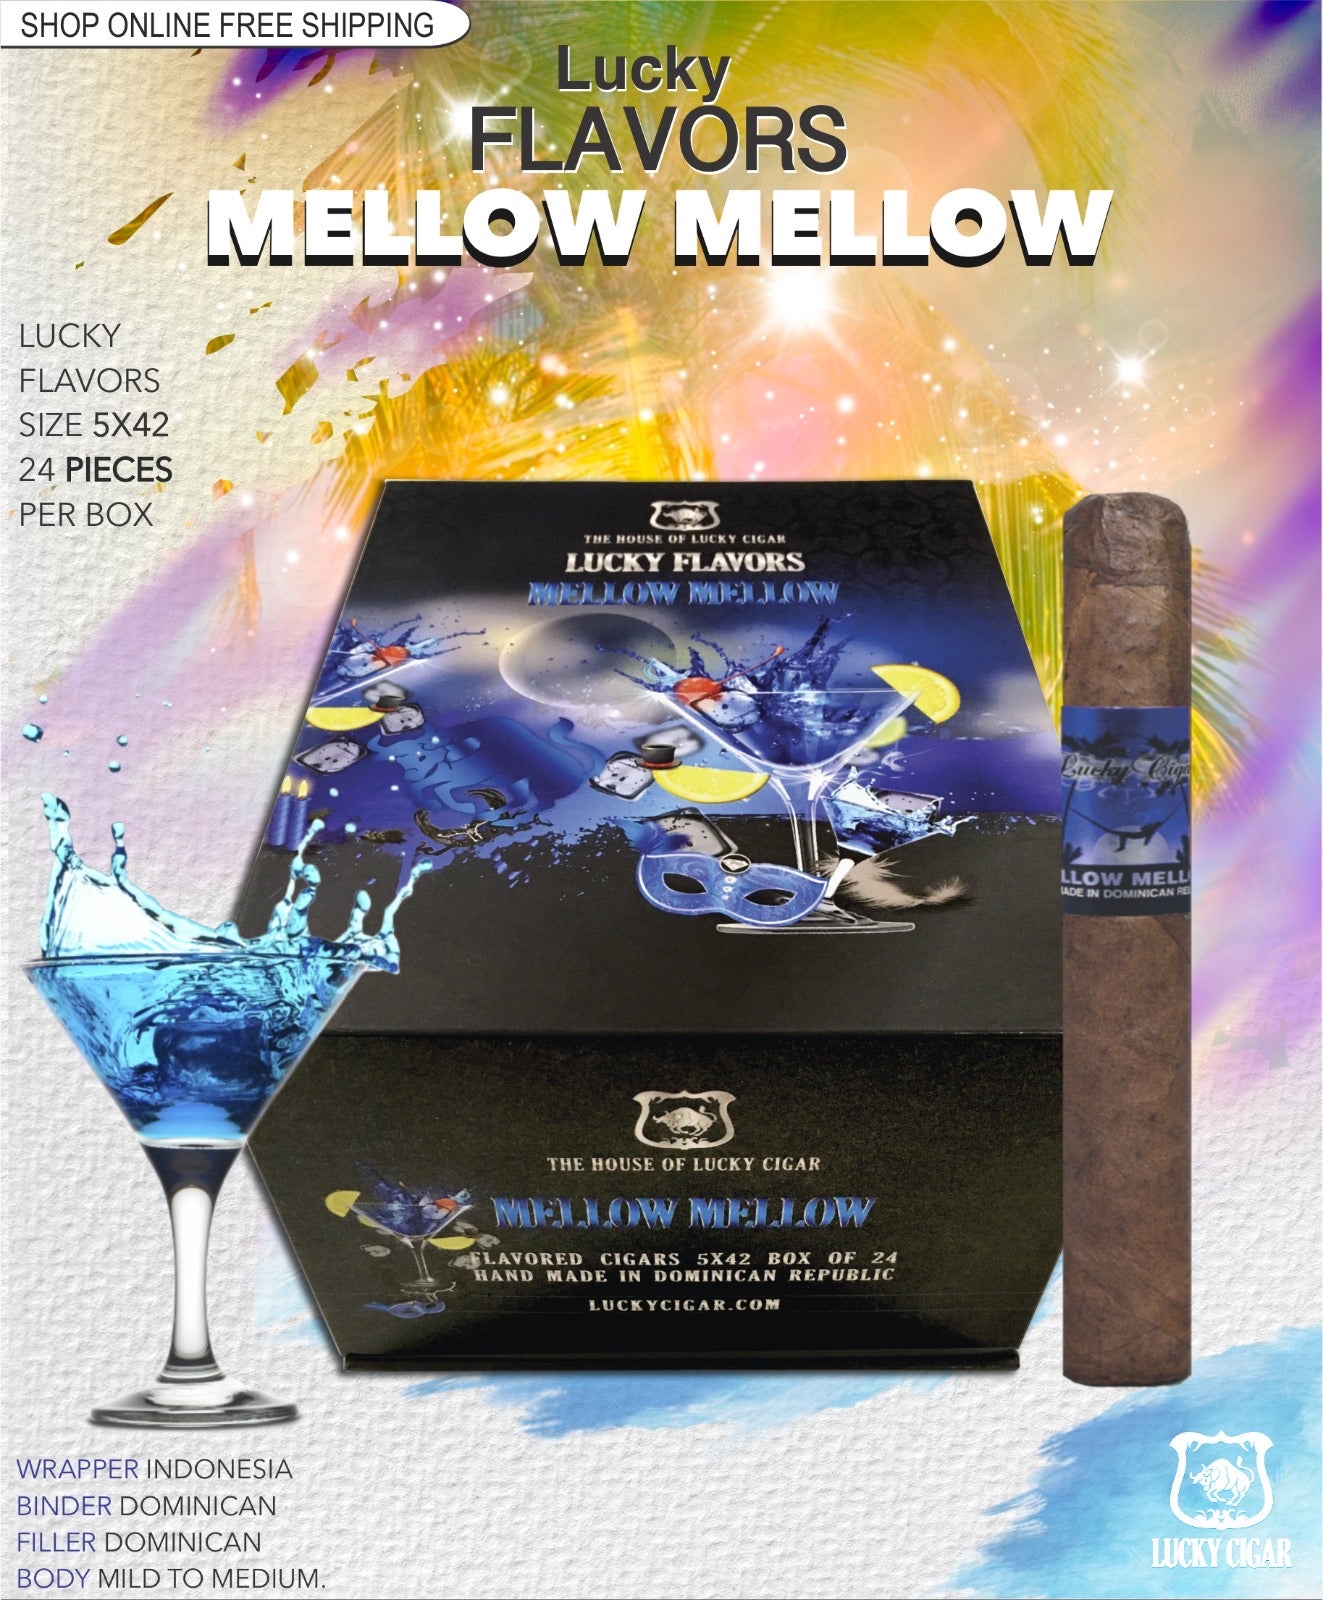 Flavored Cigars: Lucky Flavors Mellow Mellow 5x42 Box of 24 Cigars